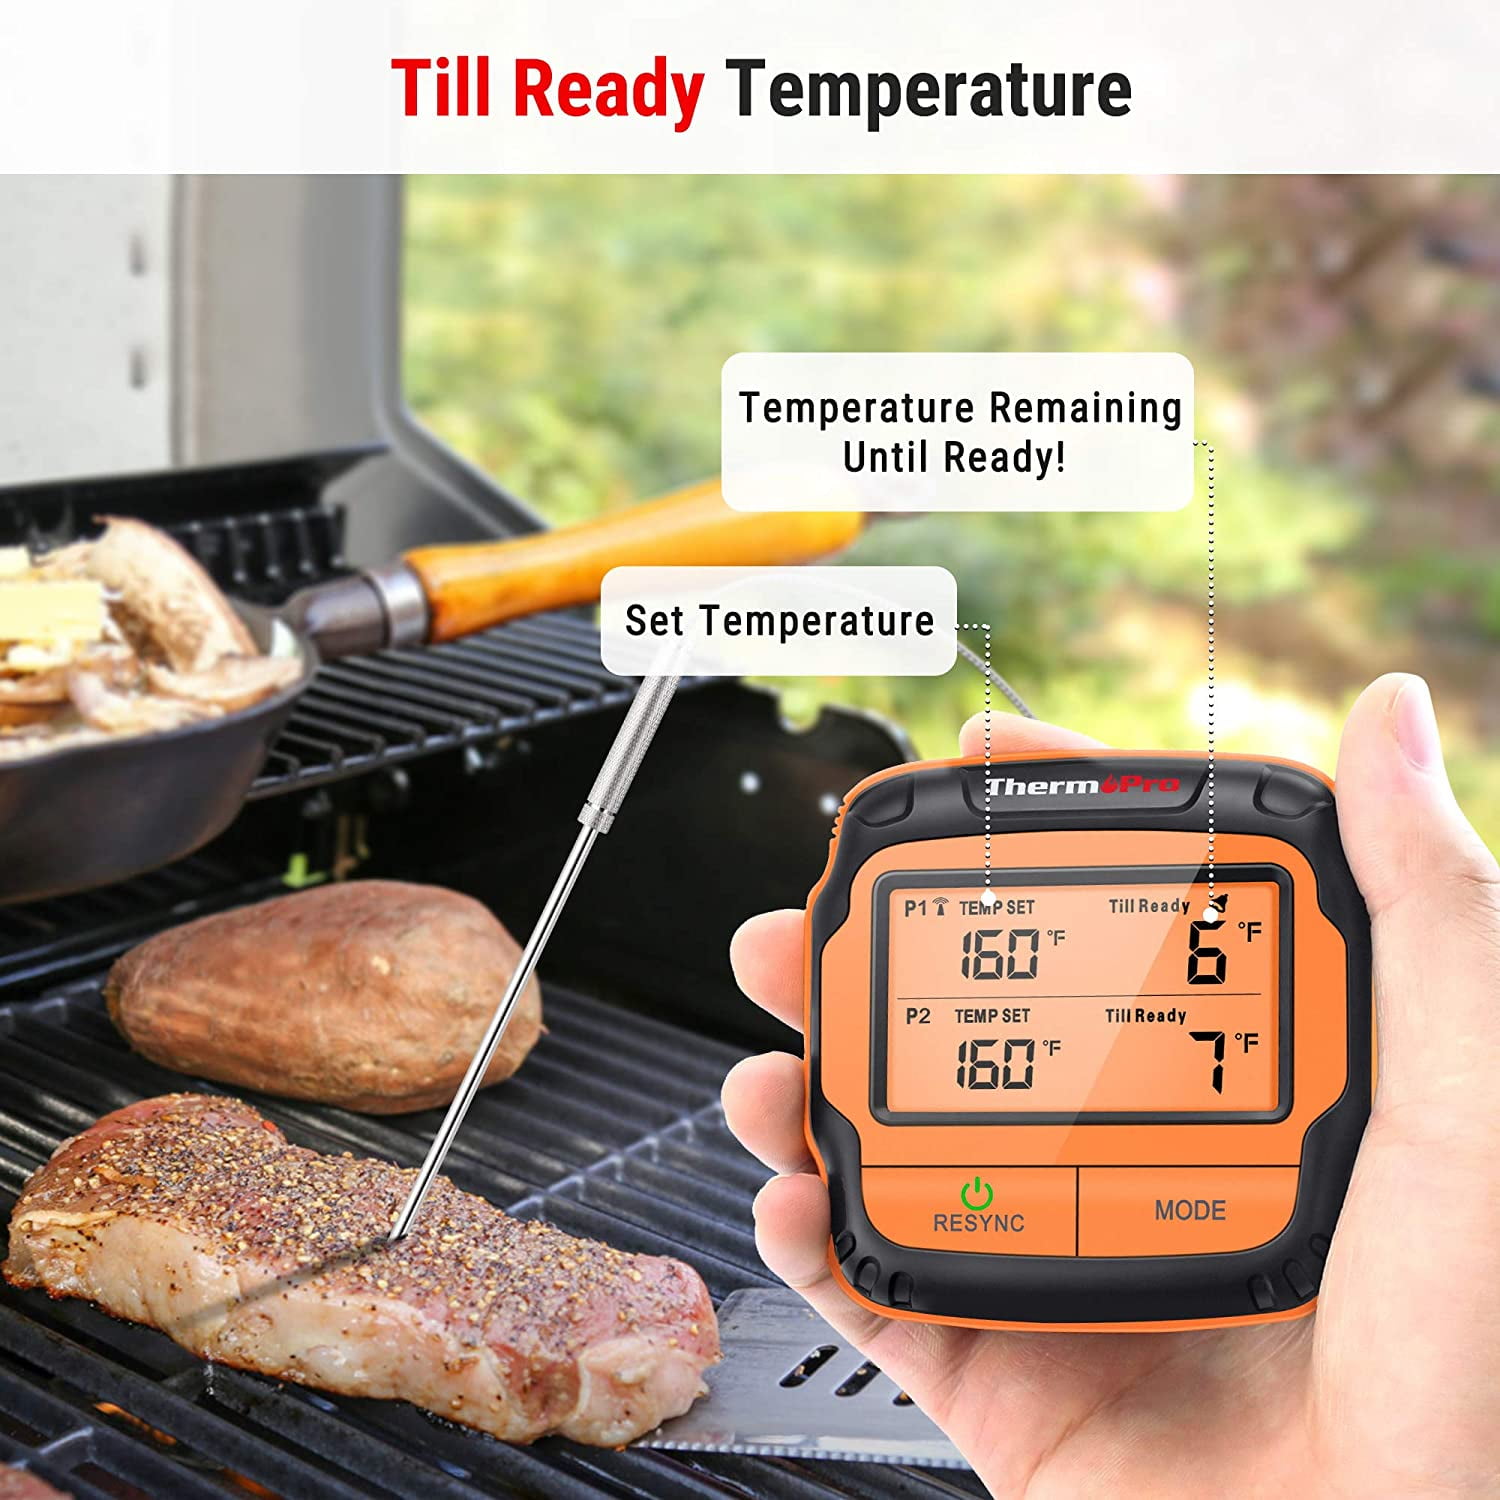  ThermoPro TP826 500FT Wireless Meat Thermometer, Dual Meat  Probe Cooking Thermometer with HI/Low Alert, IPX4 Food Grill Thermometer,  Outdoor Fryer Accessories for BBQ, Smoker, Oven, Grilling Gifts : Home &  Kitchen